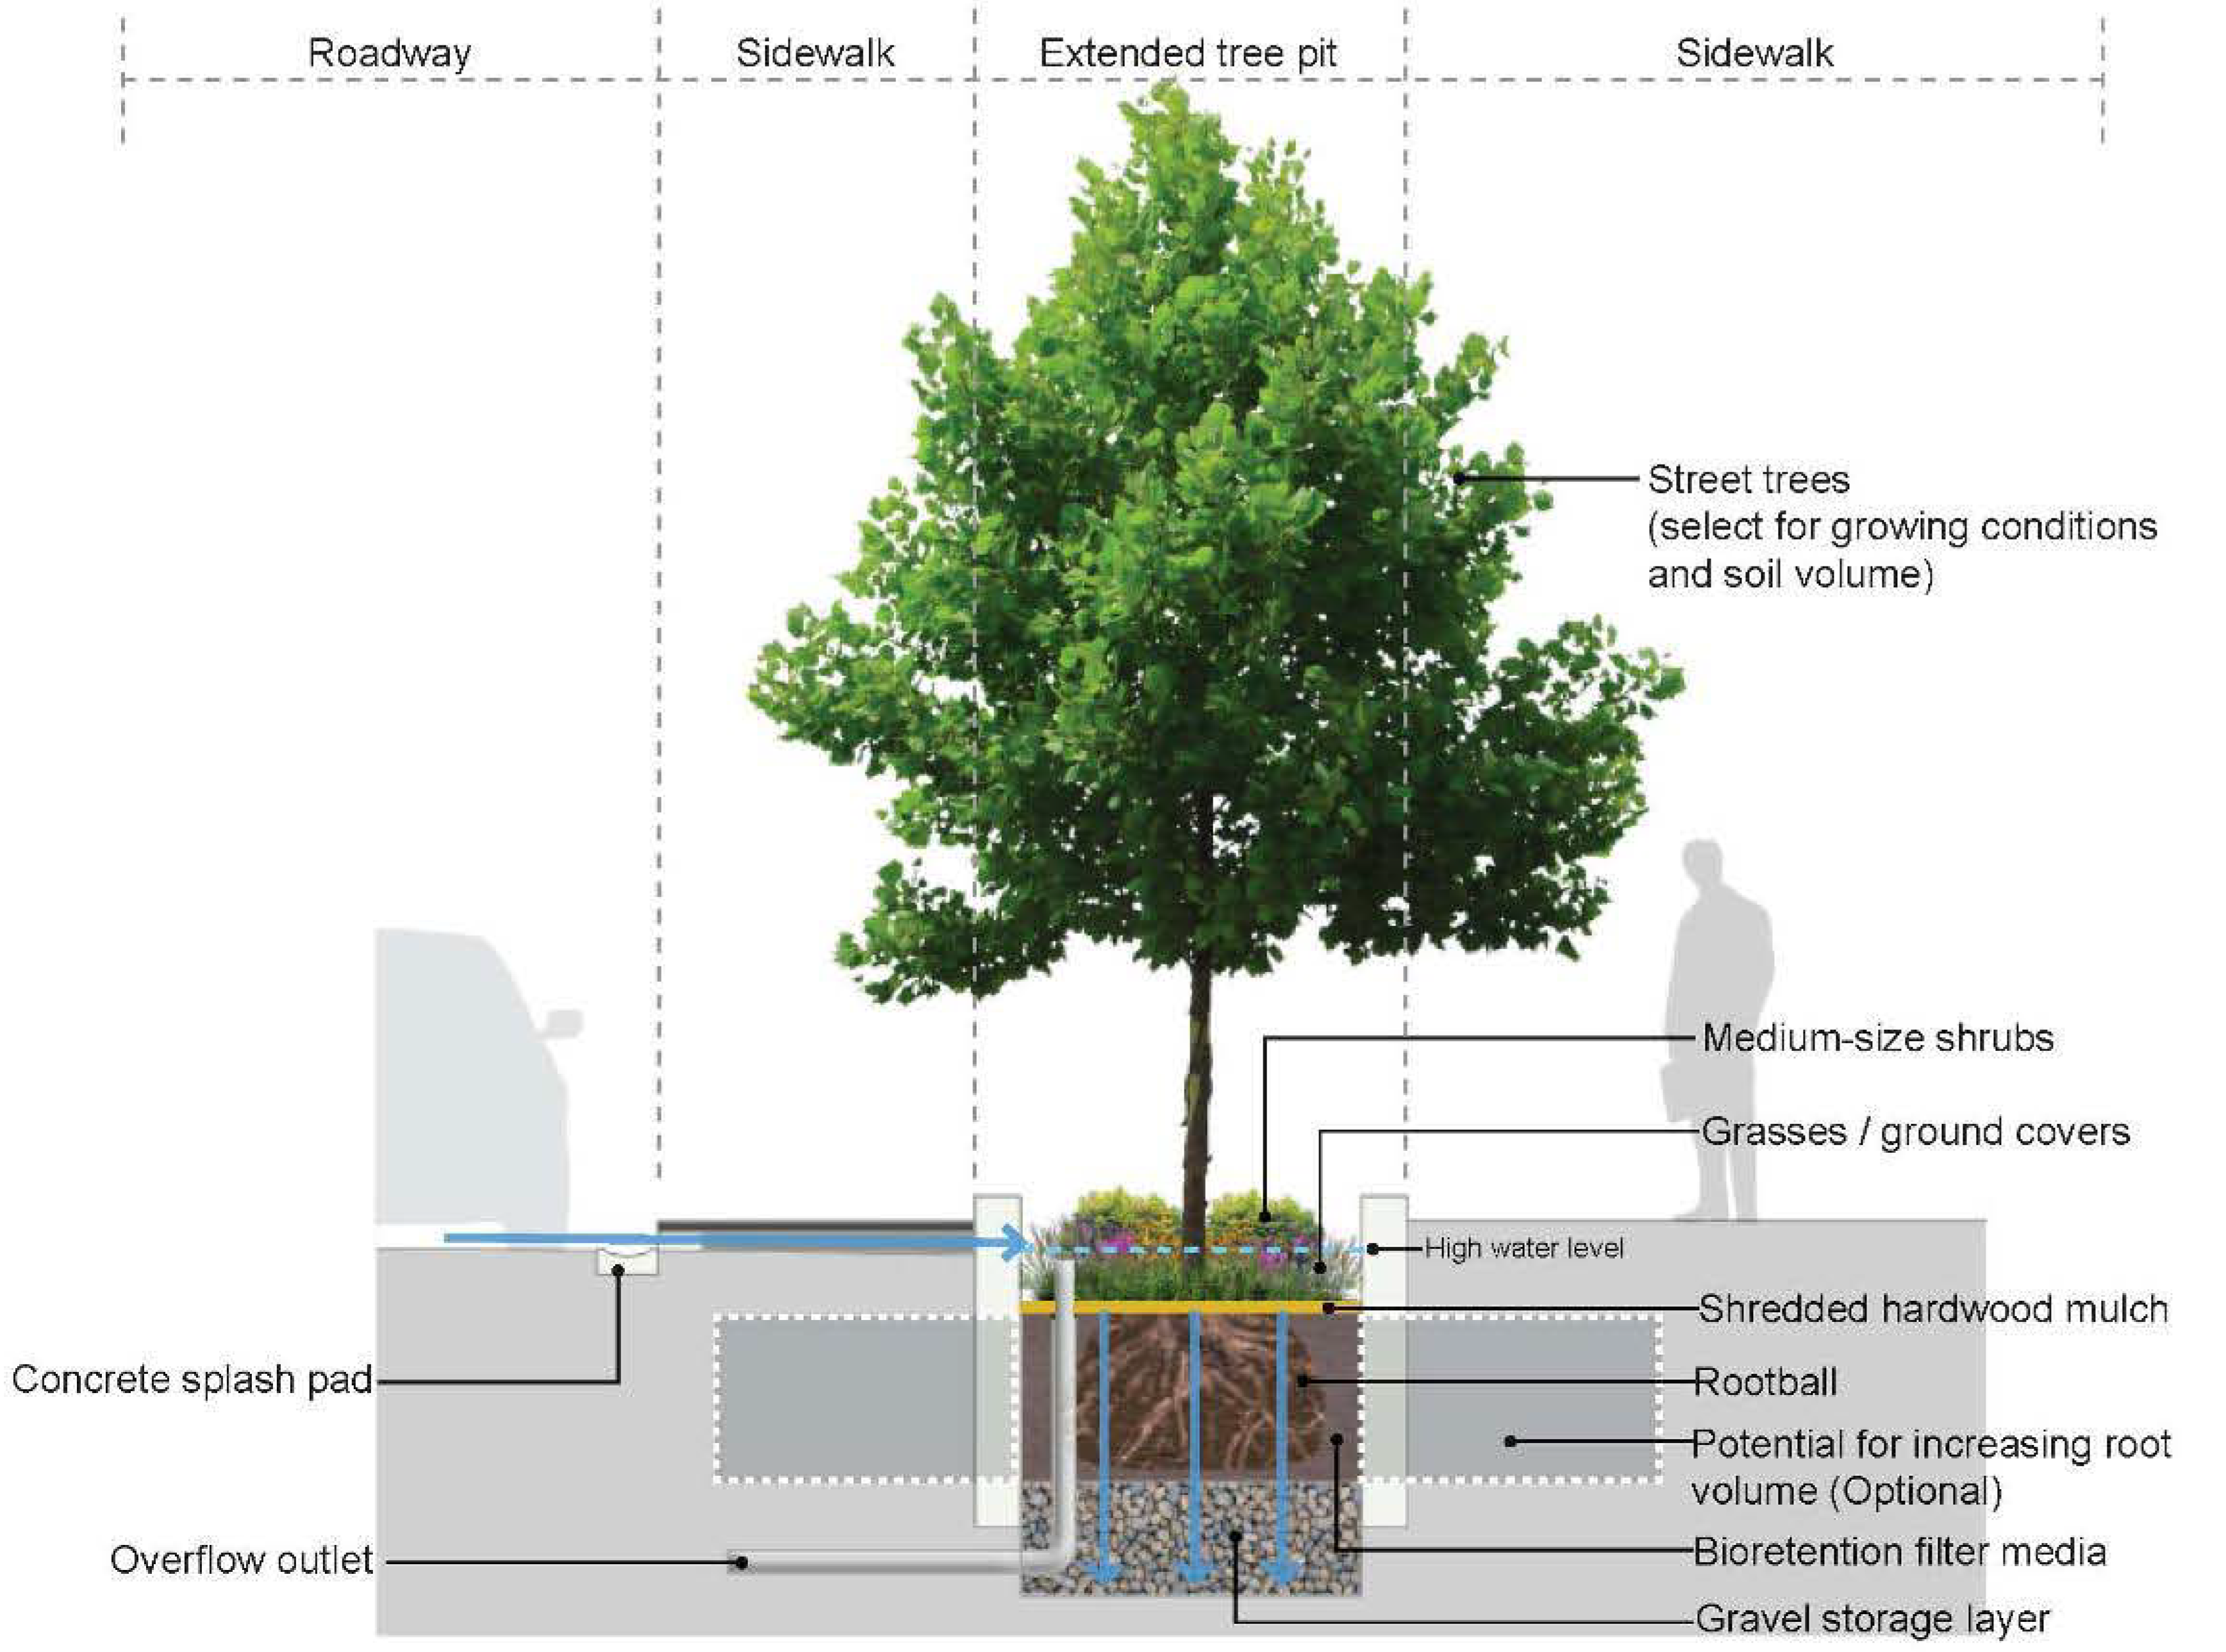 Example of Low Impact Development (LID) showing tree